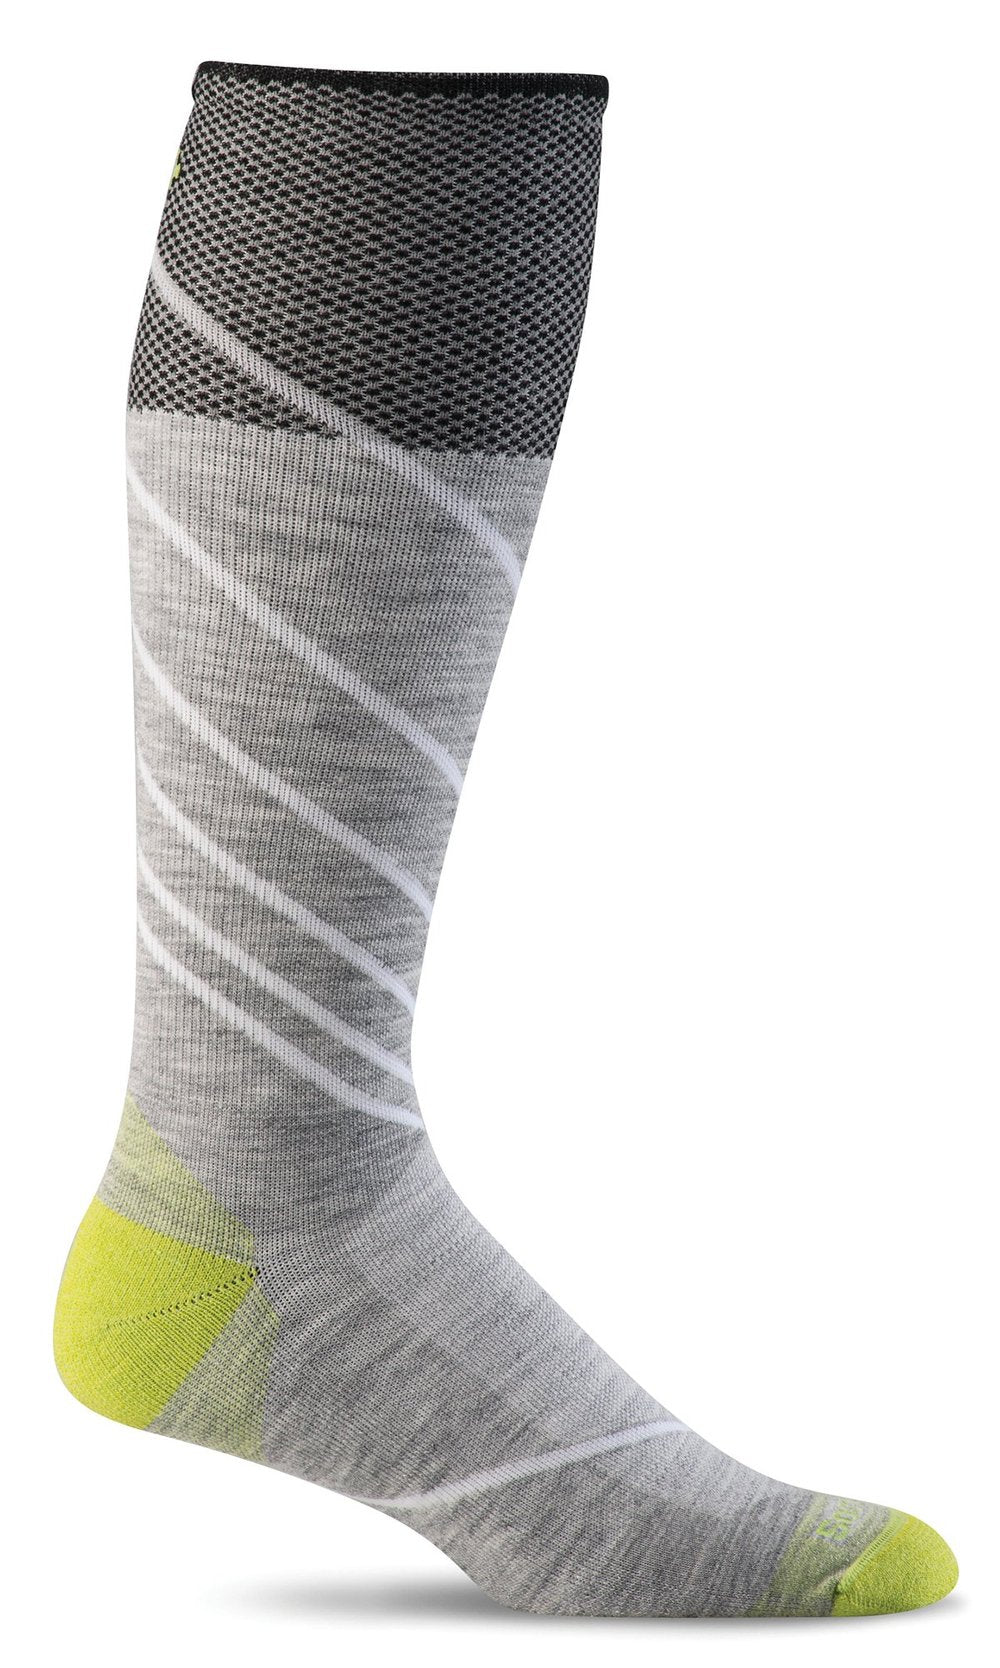 Pulse Knee-High - Grey Firm Compression (20-30mmHg)